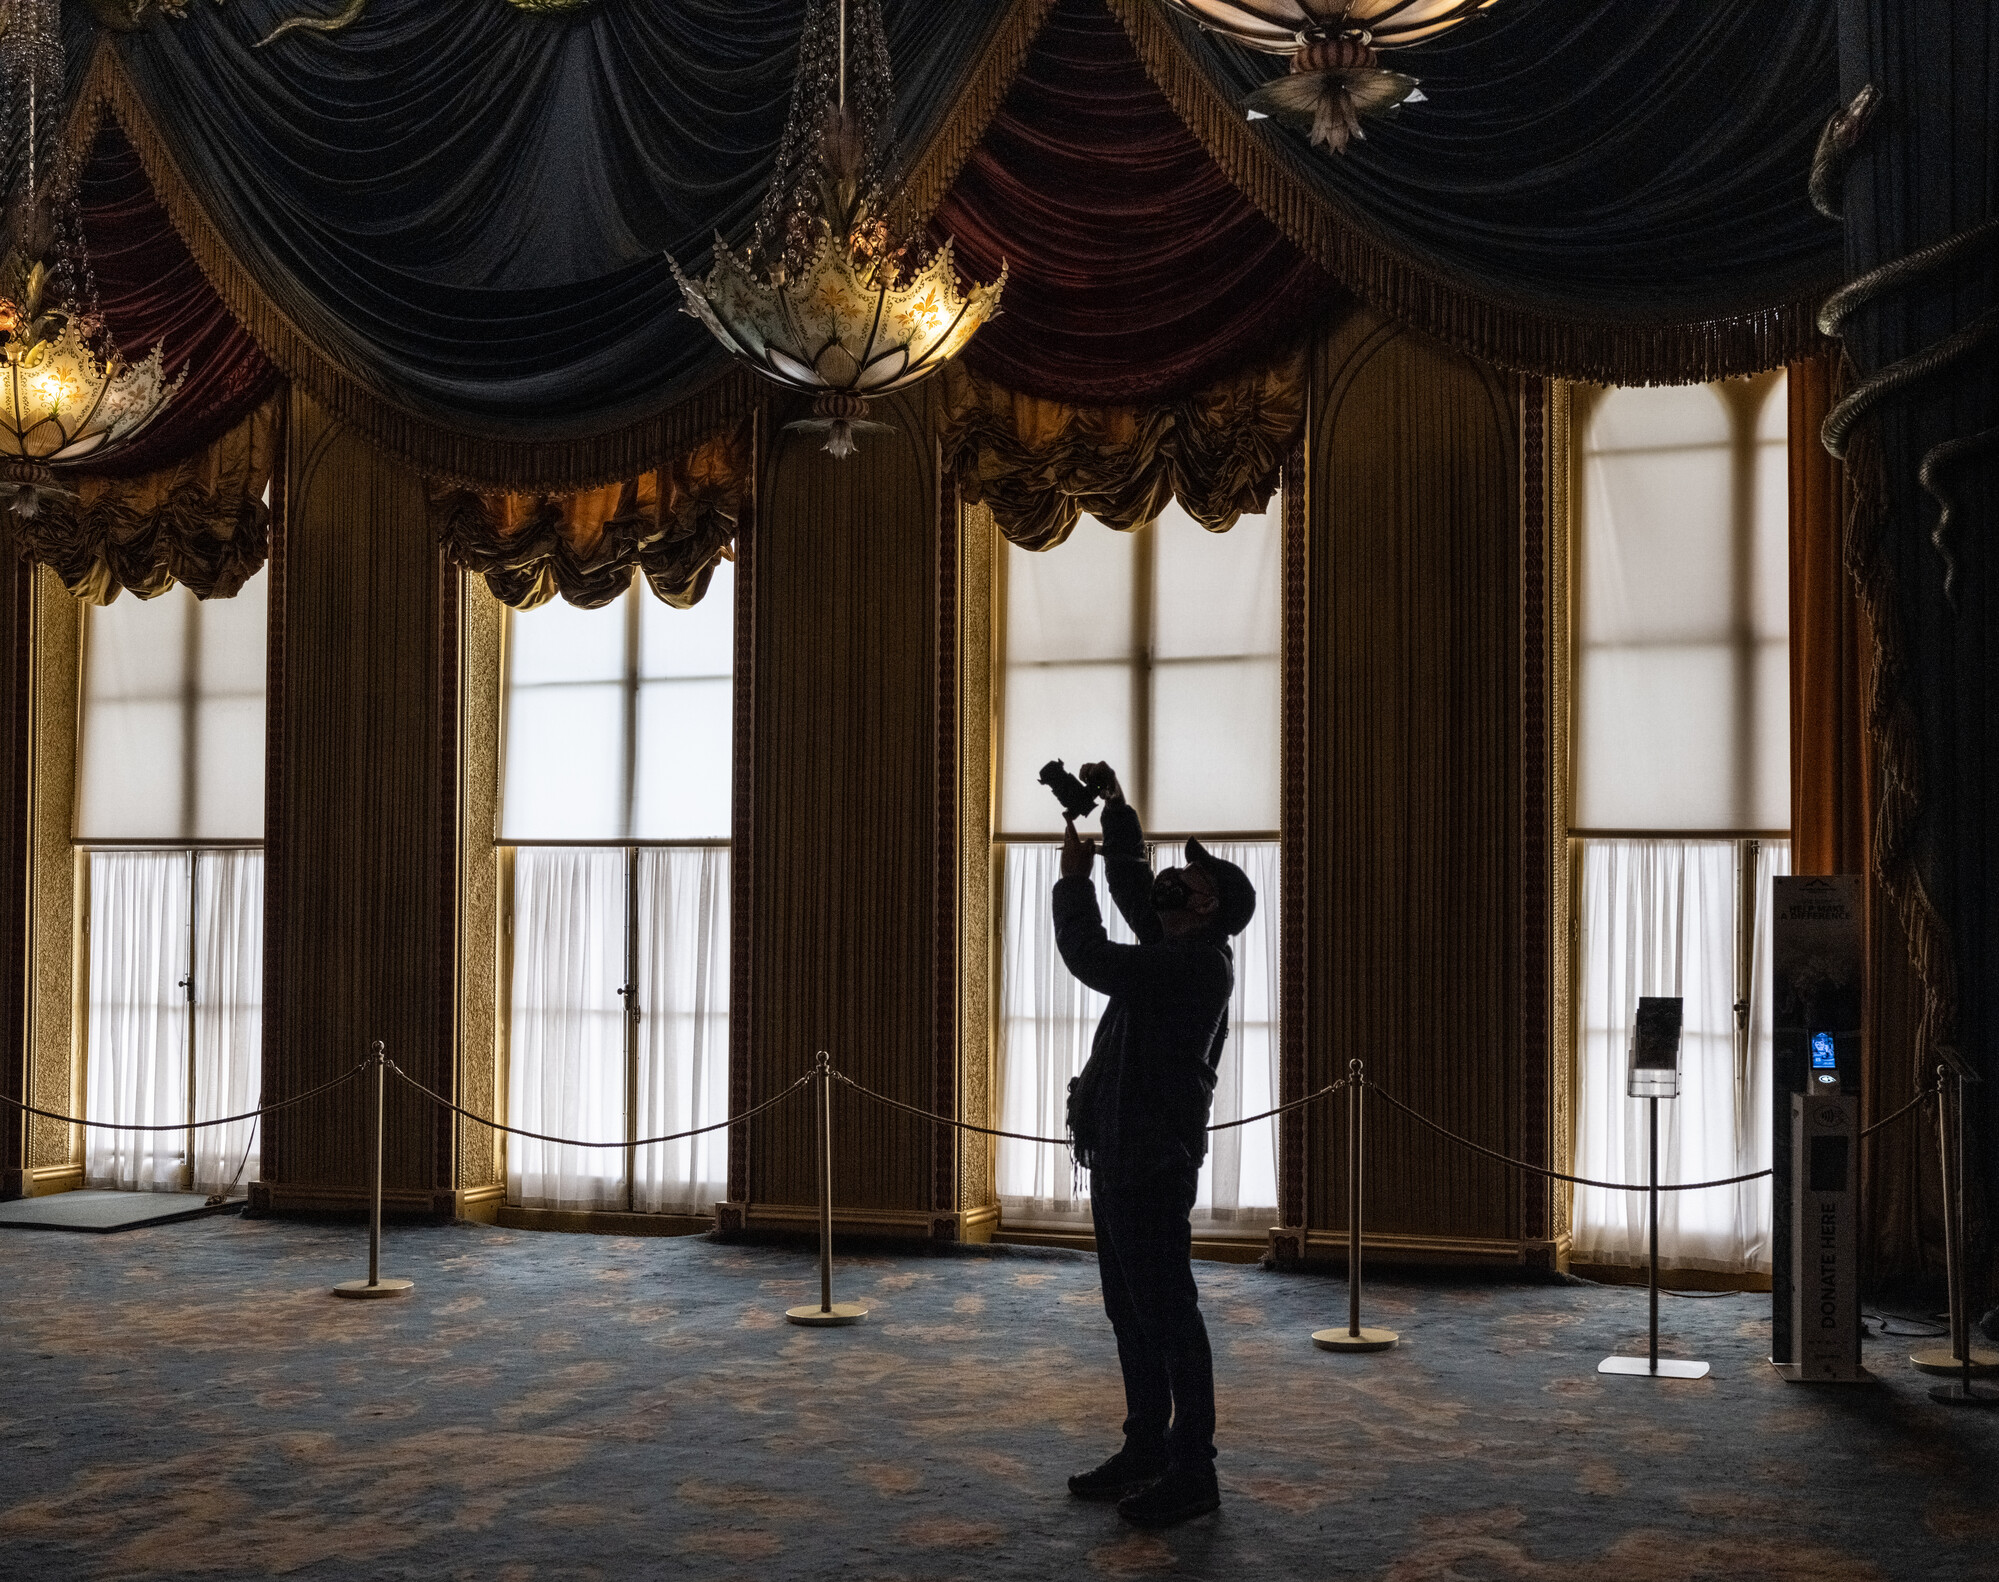 Man taking a photograph in the Music Room of the Royal Pavilion